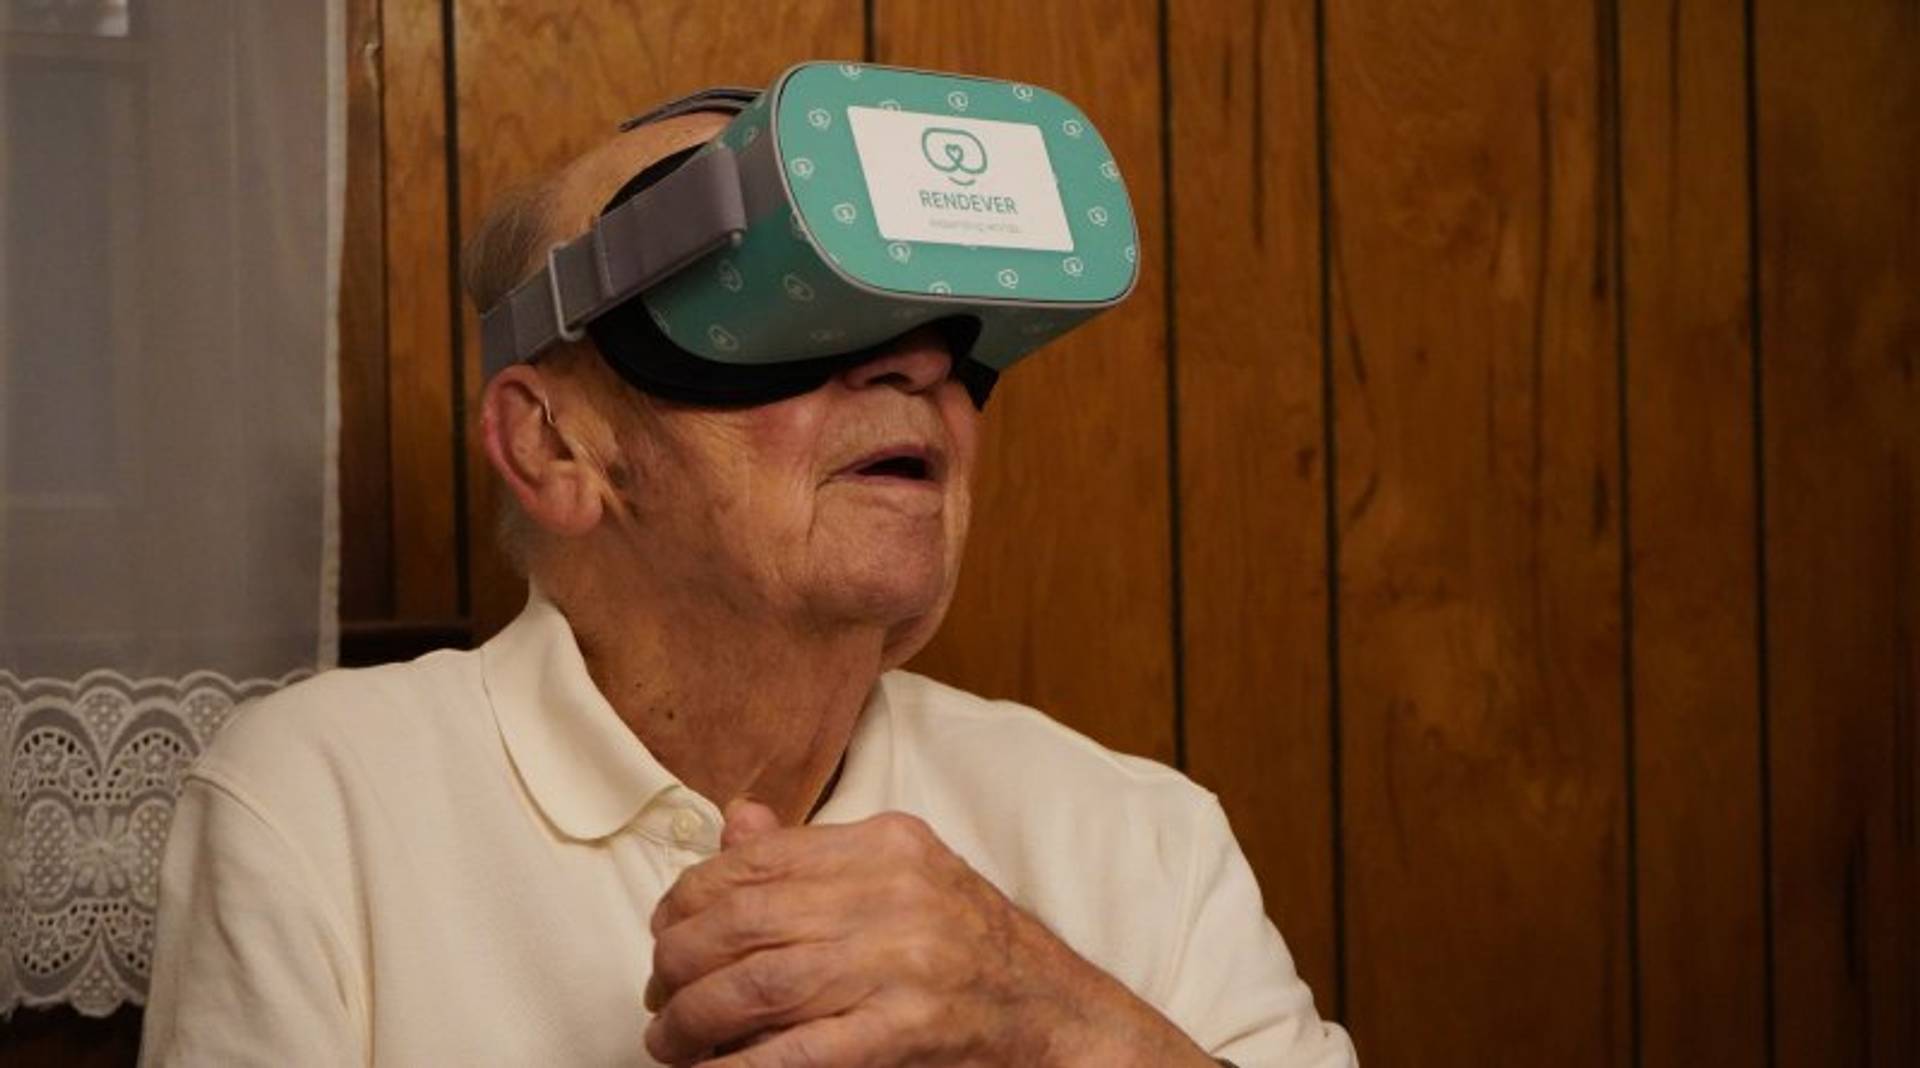 Boomers and Older Adults are embracing tech